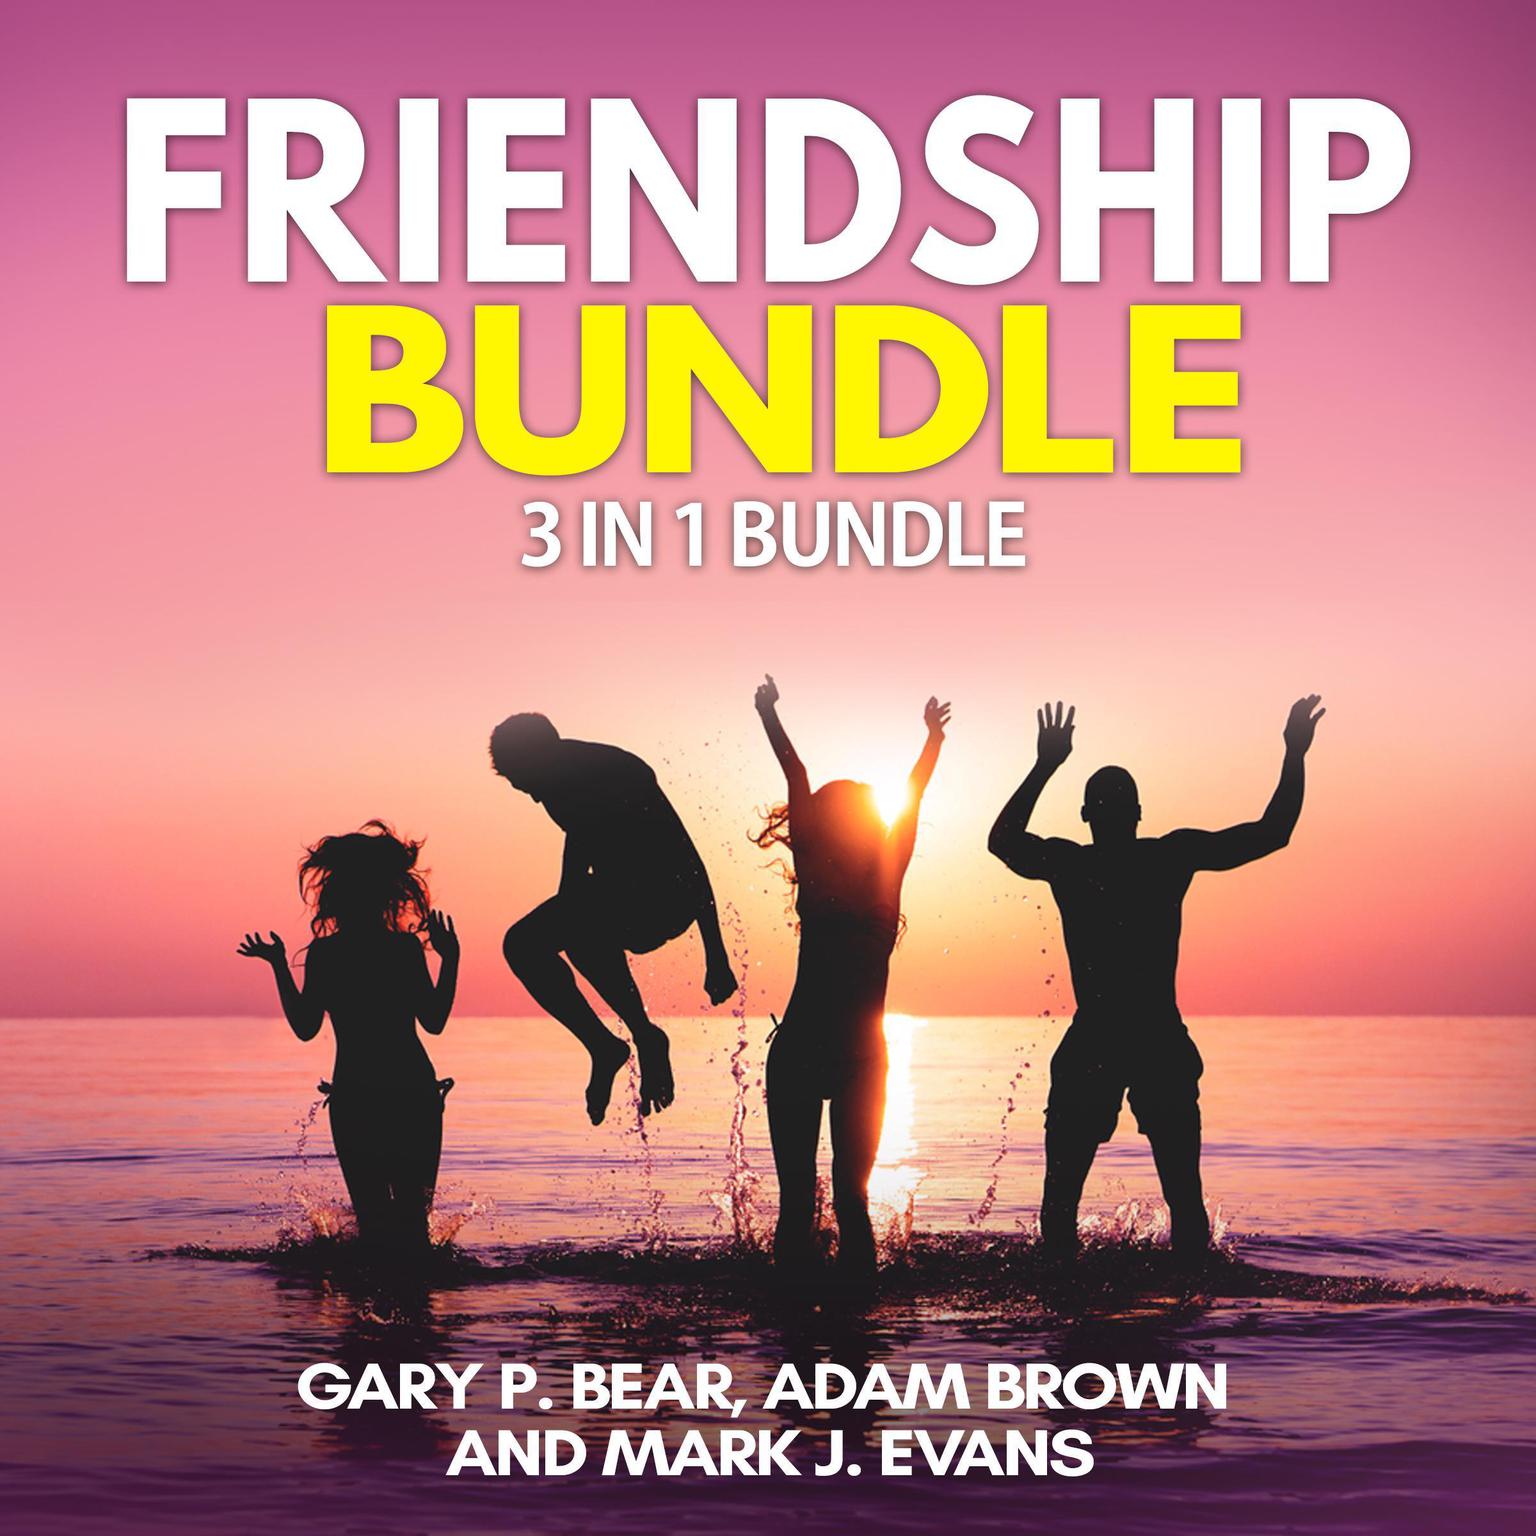 Friendship Bundle: 3 in 1 Bundle, How to Win Friends, Manipulation, Friends Book Audiobook, by Gary P. Bear